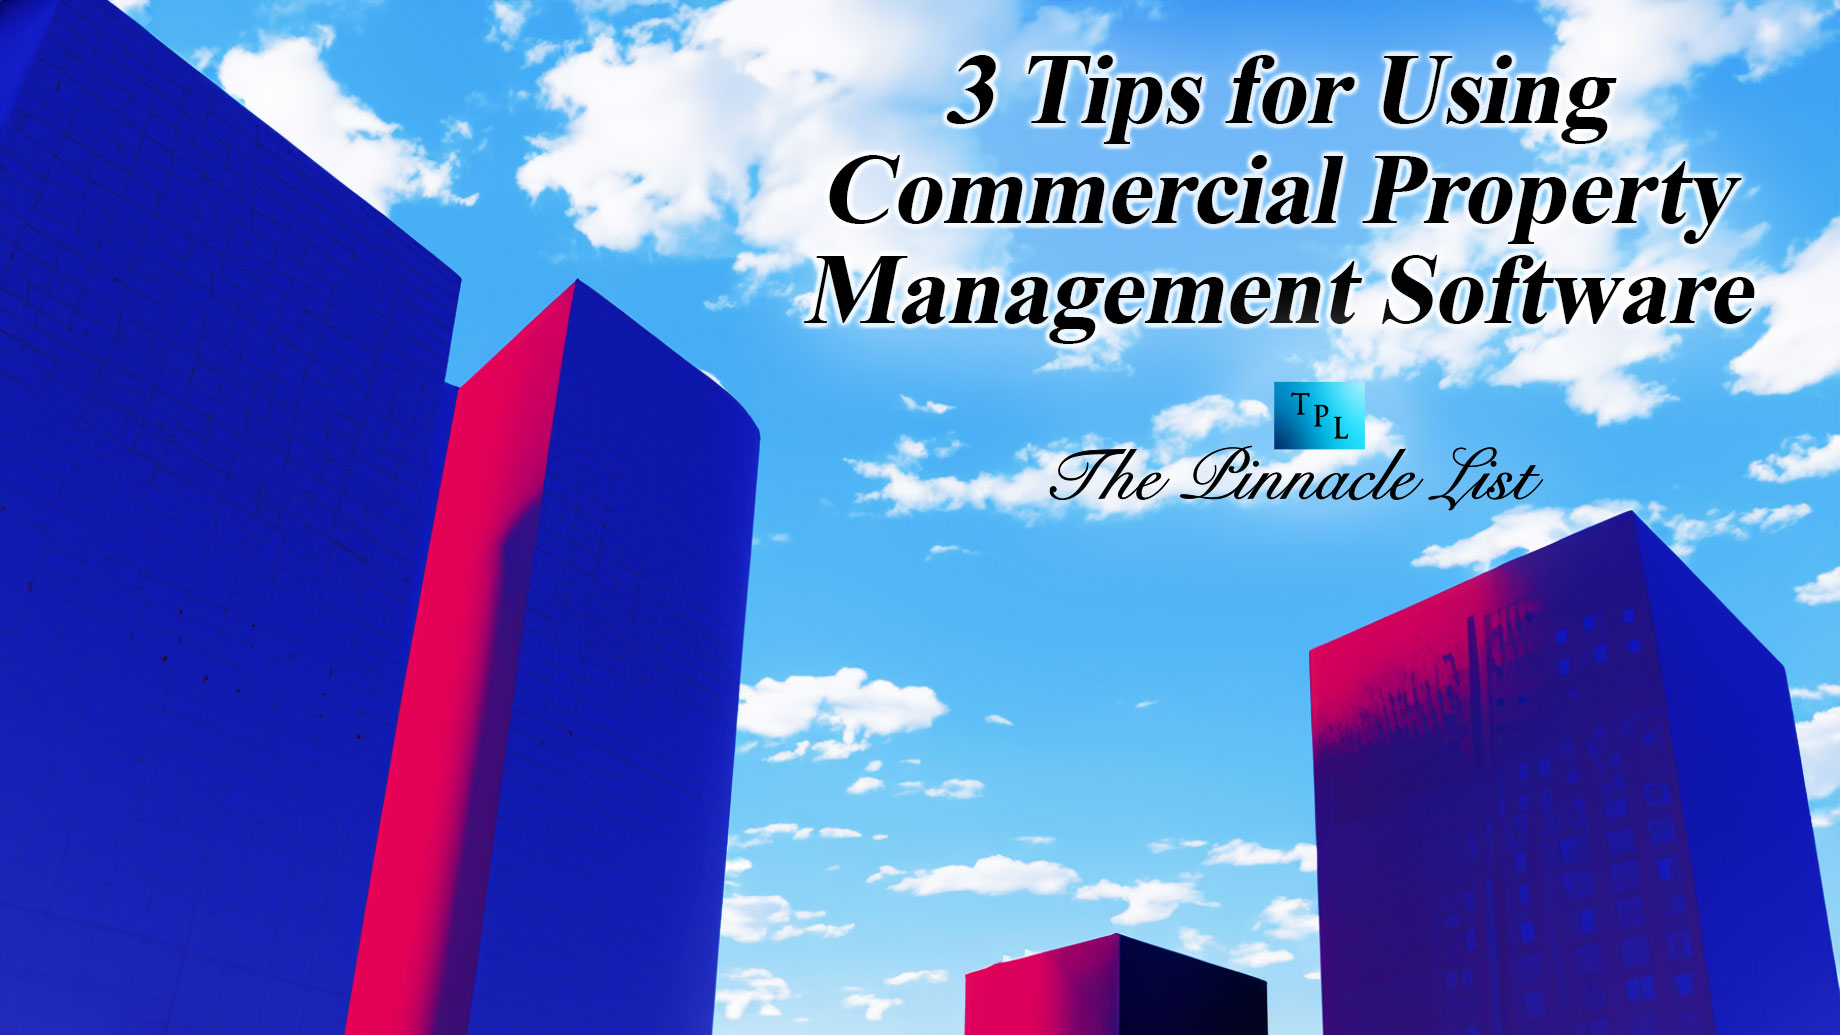 3 Tips for Using Commercial Property Management Software